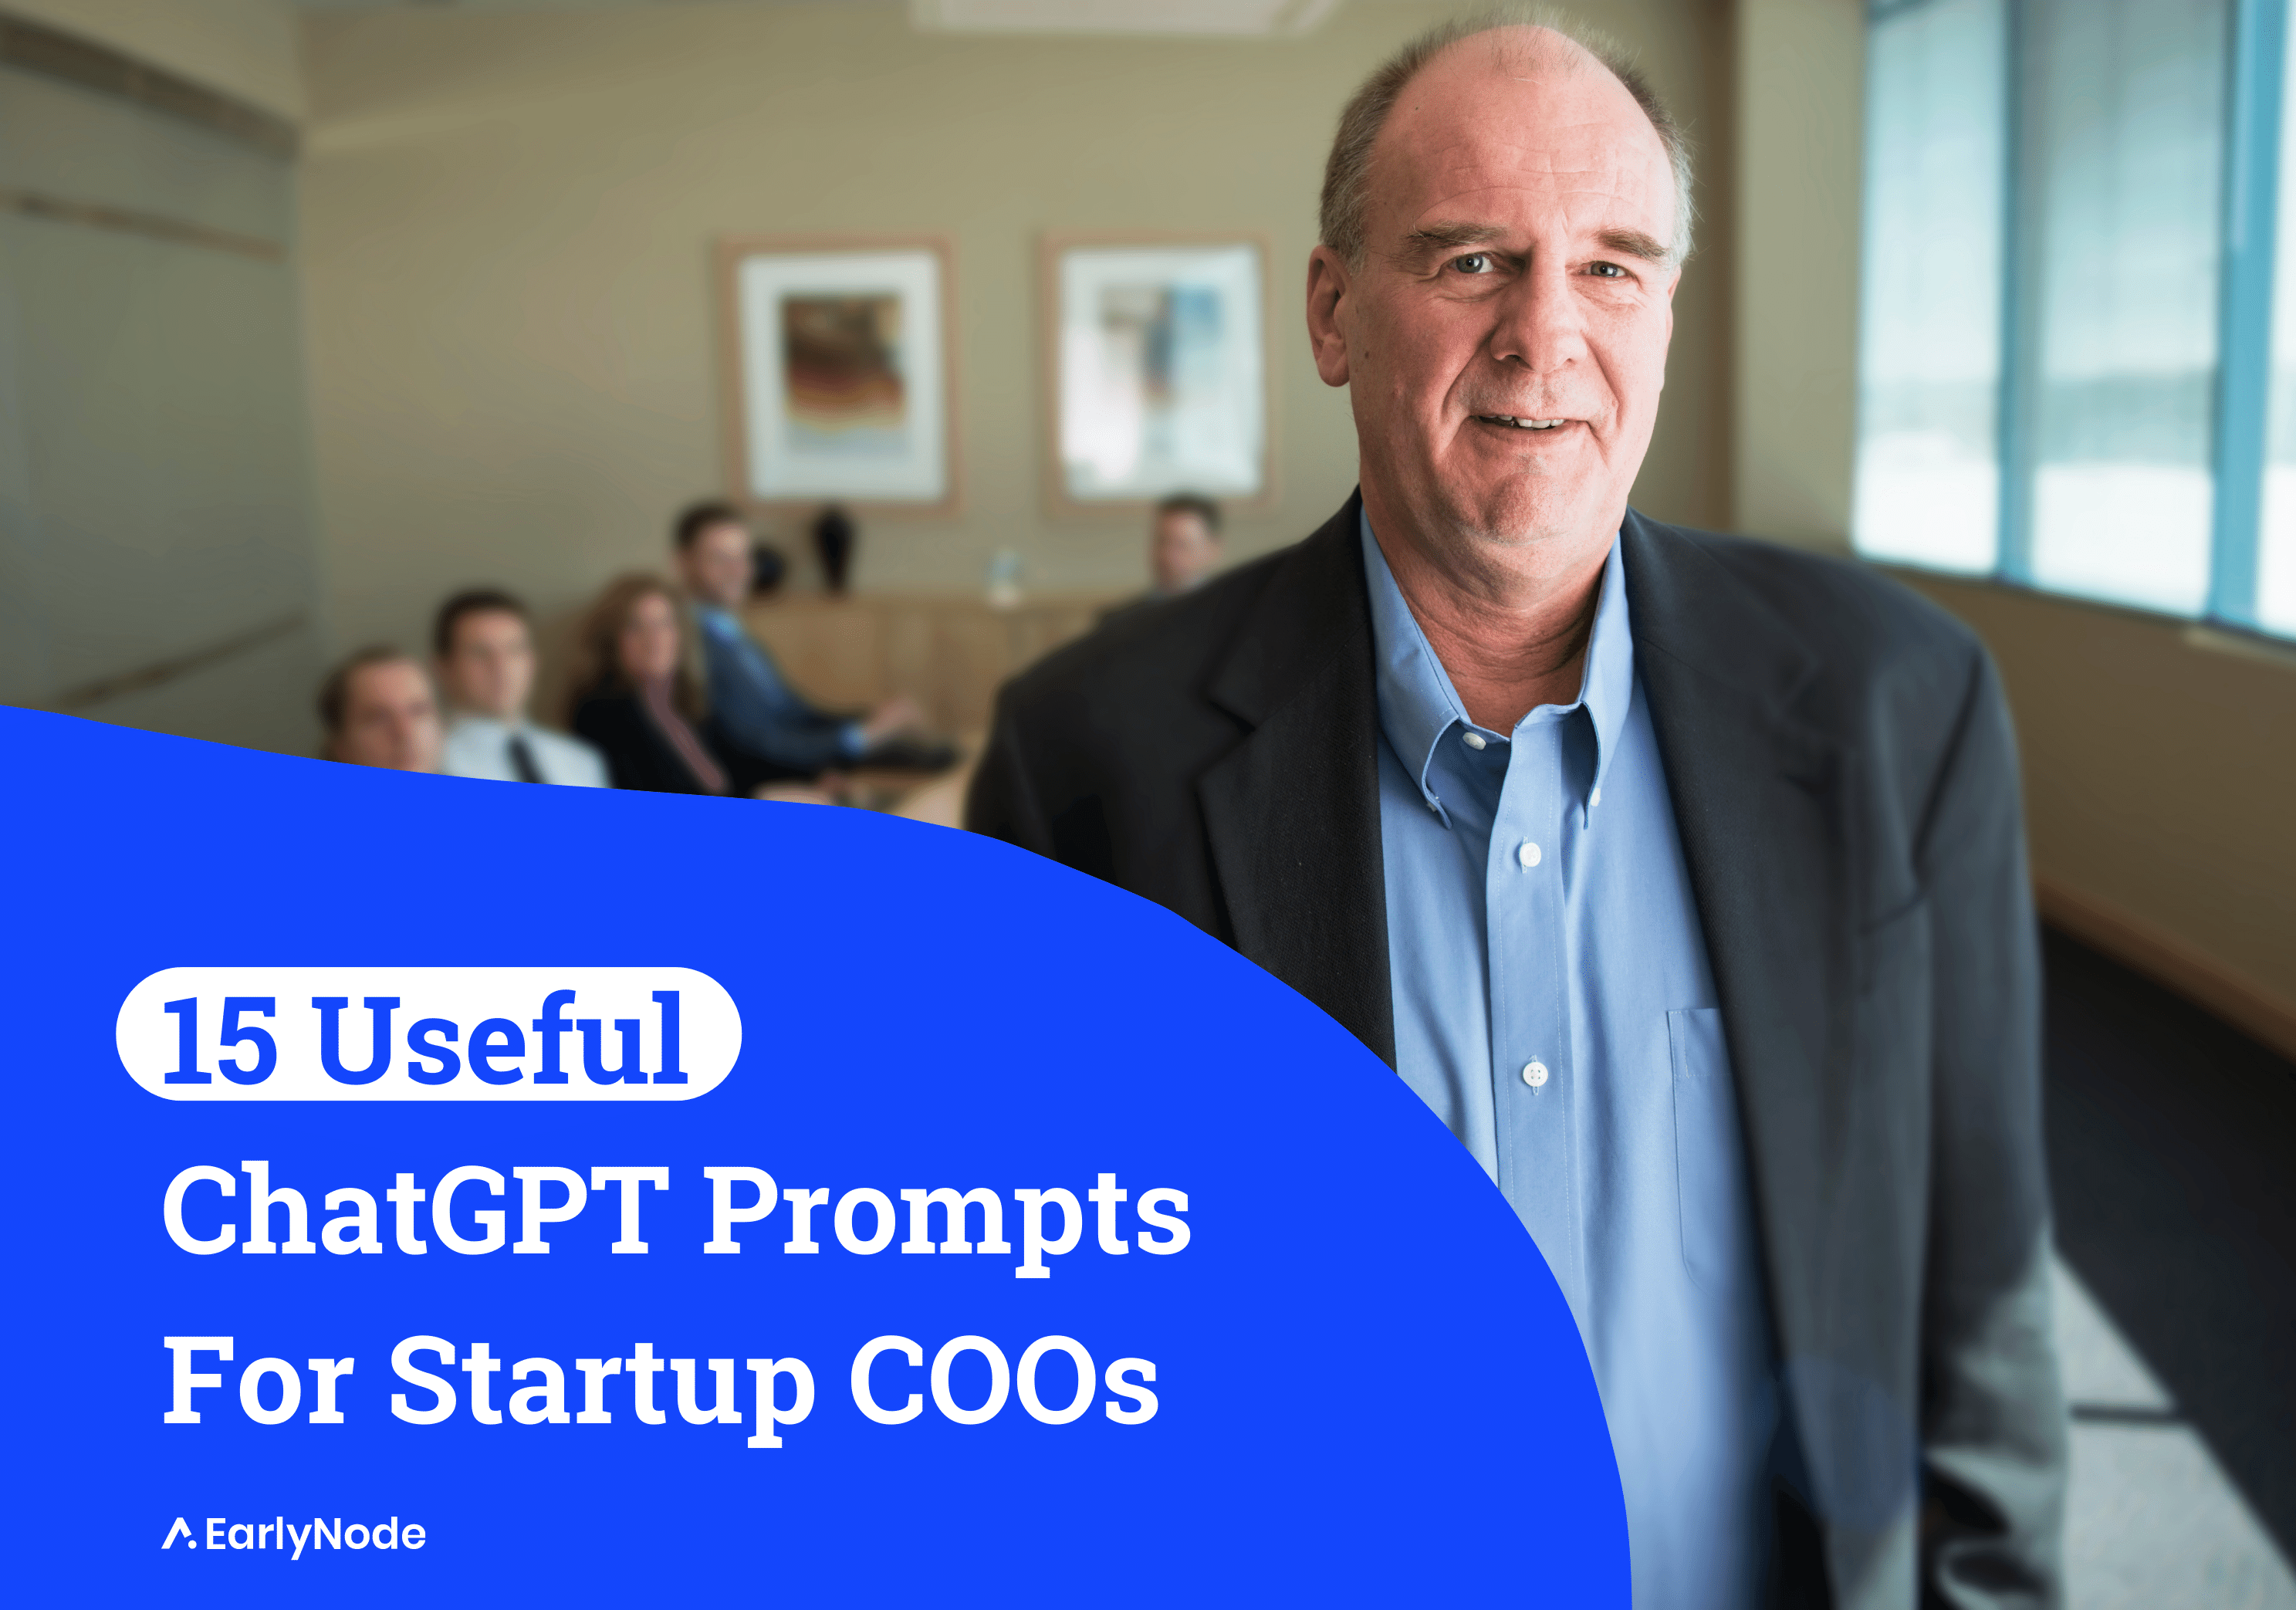 15 Incredibly Useful ChatGPT Prompts for a COO of a Startup